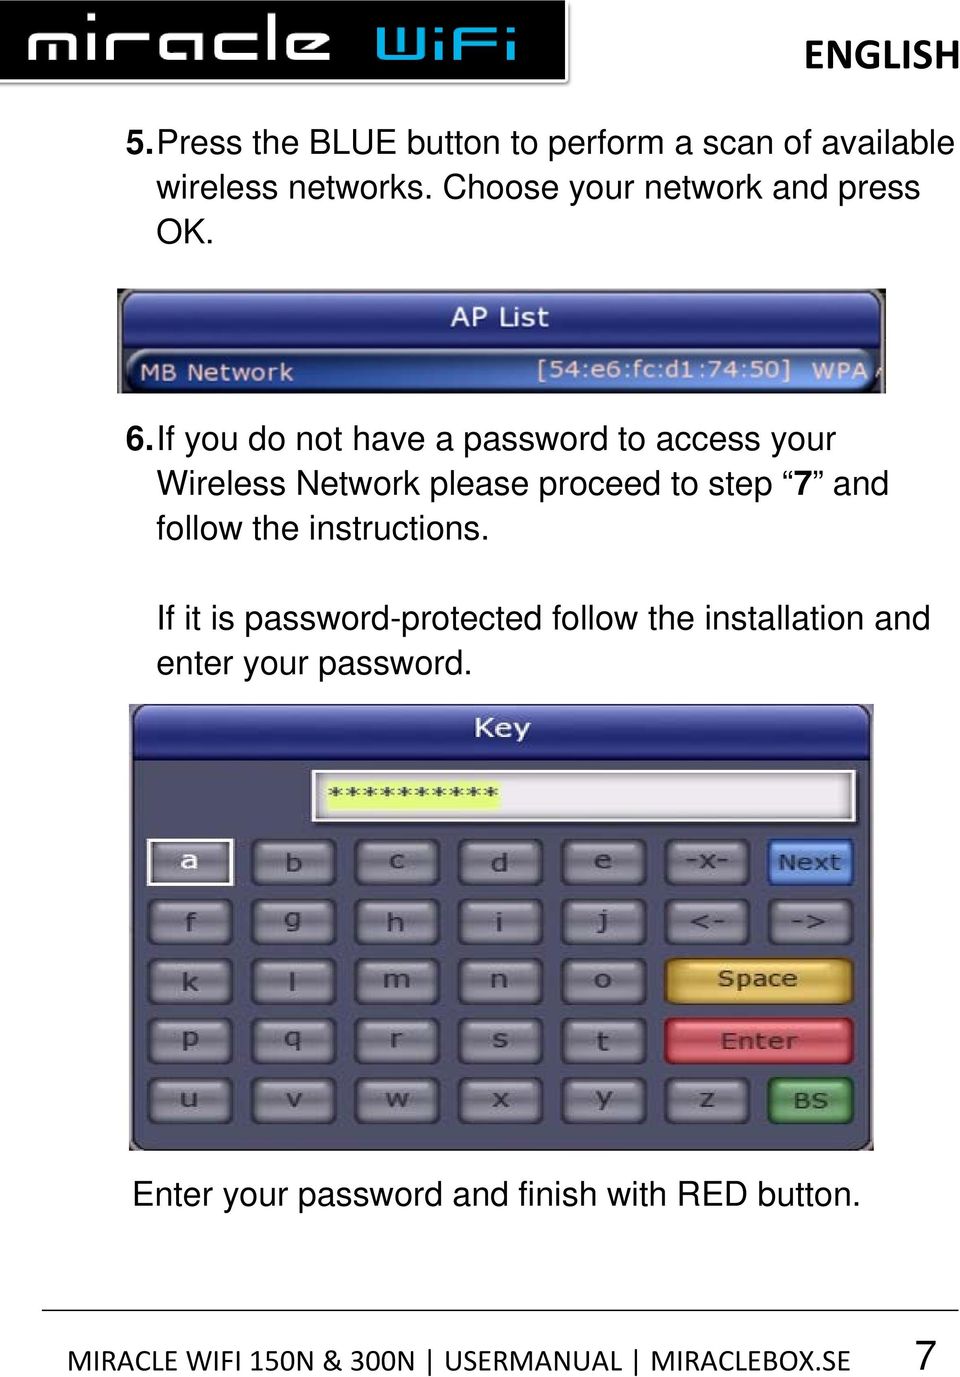 If you do not have a password to access your Wireless Network please proceed to step 7 and follow the